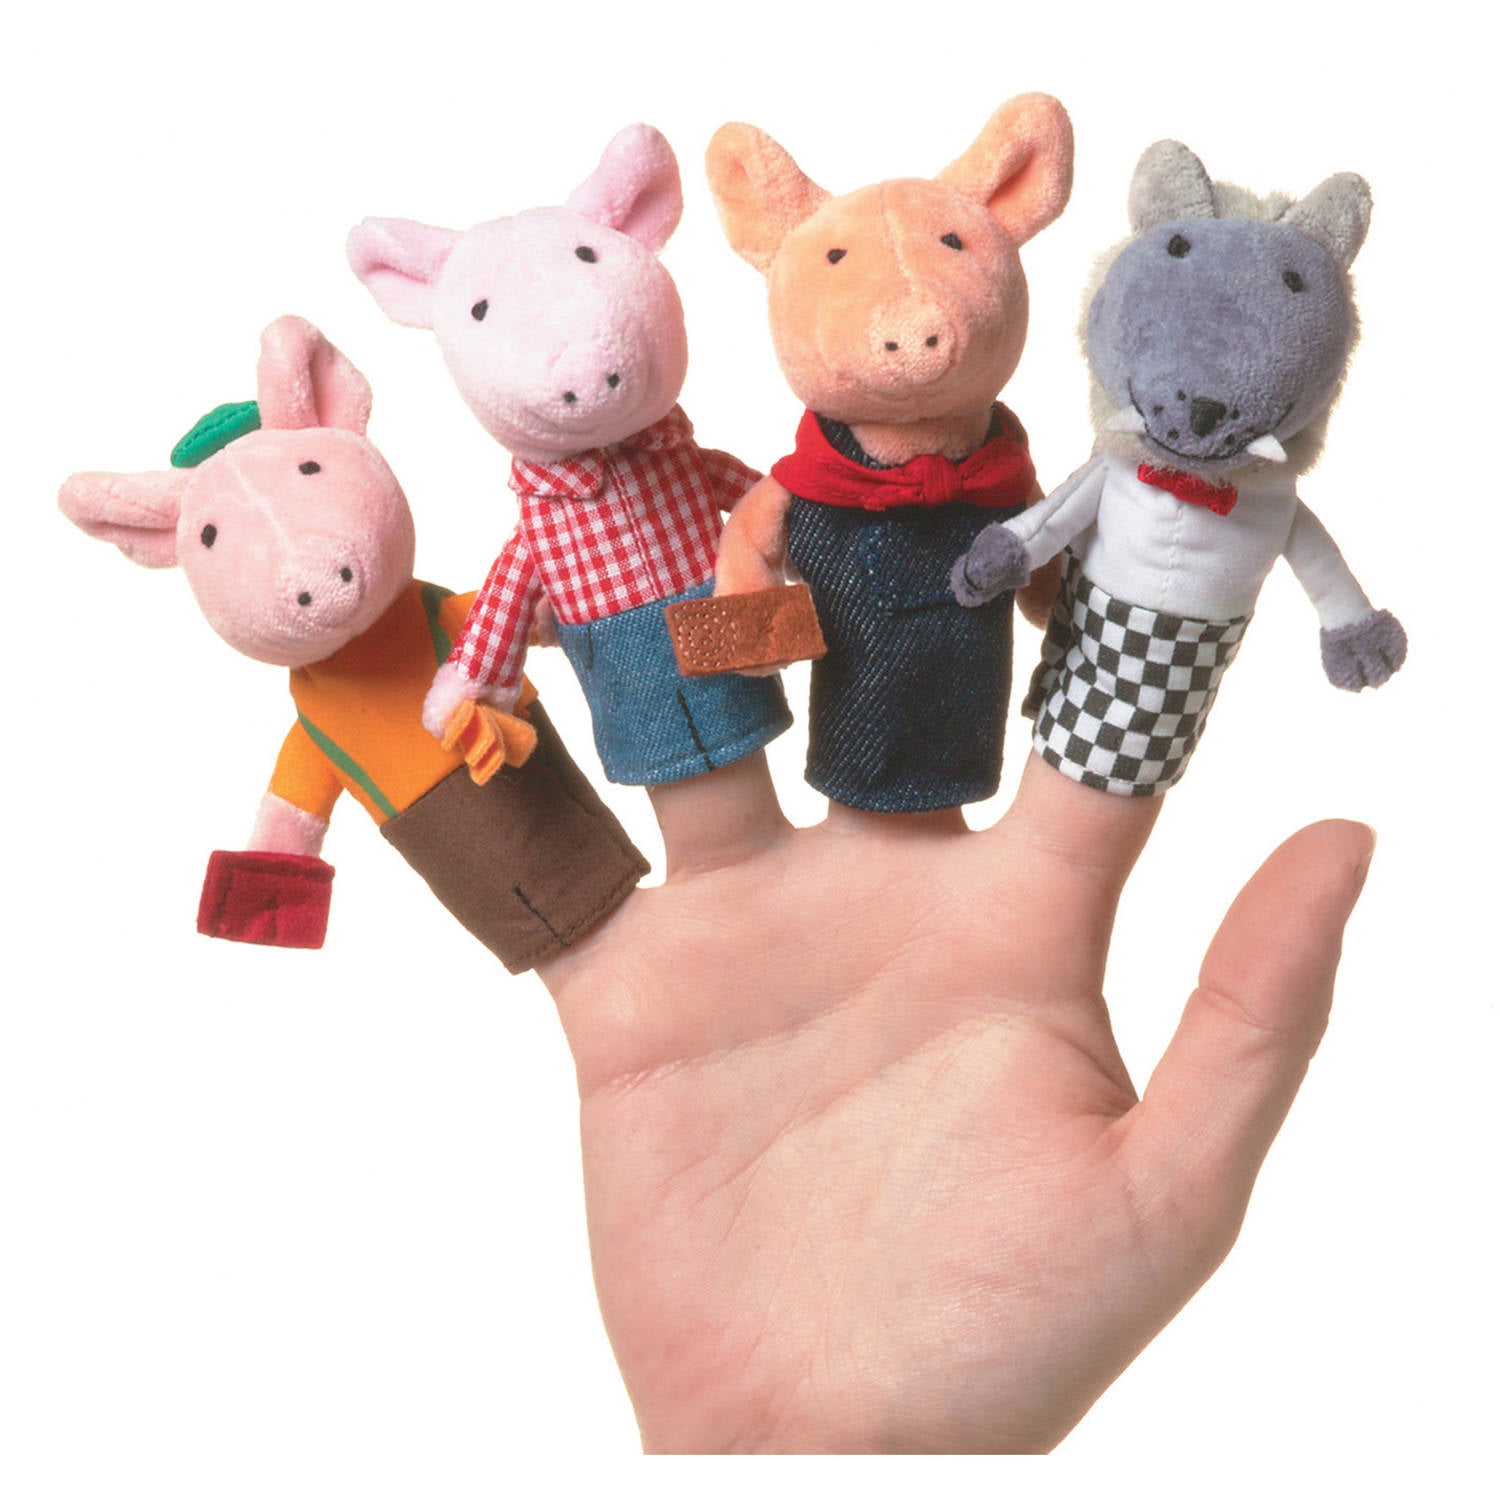 Hand Puppets Story Three Pigs 8 Pcs in Storage Bag for sale online 